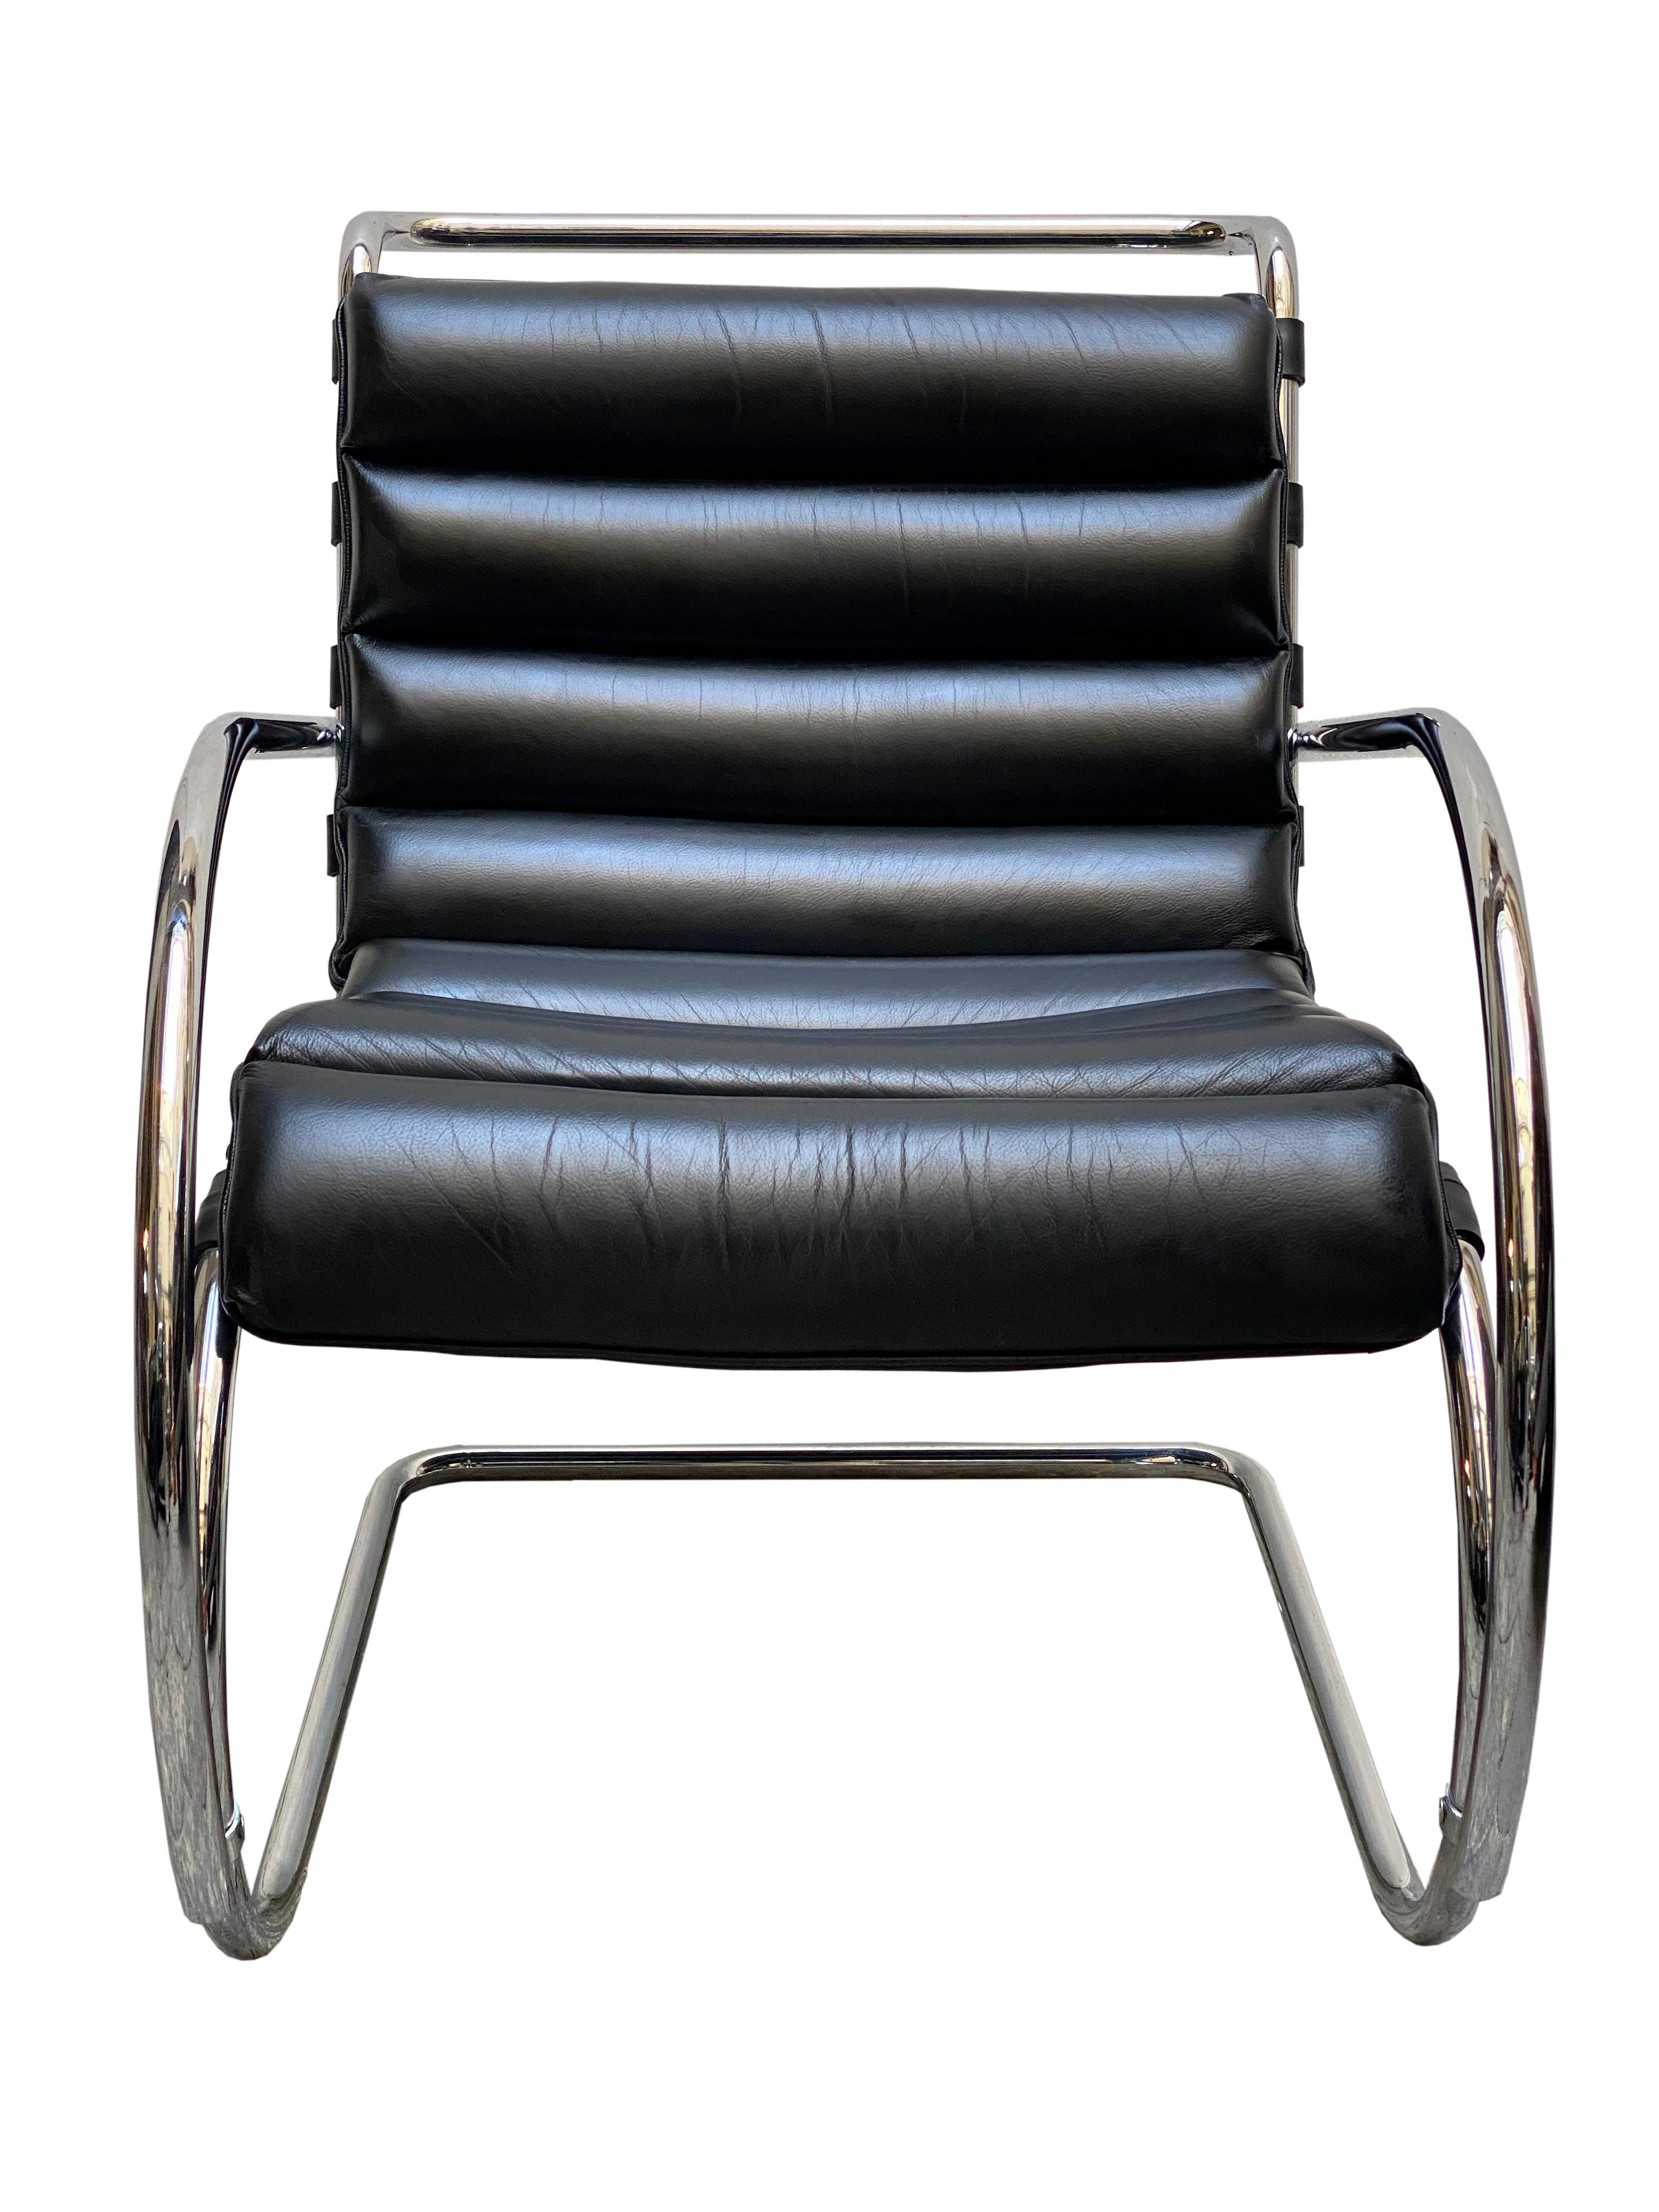 The MR Bauhaus armchair was designed by Ludwig Mies van der Rohe in 1927 for an exhibition flat in the Weissenhofsiedlung in Stuttgart. The combination of cool tubular steel and high-quality leather upholstery makes the Alivar design classic an